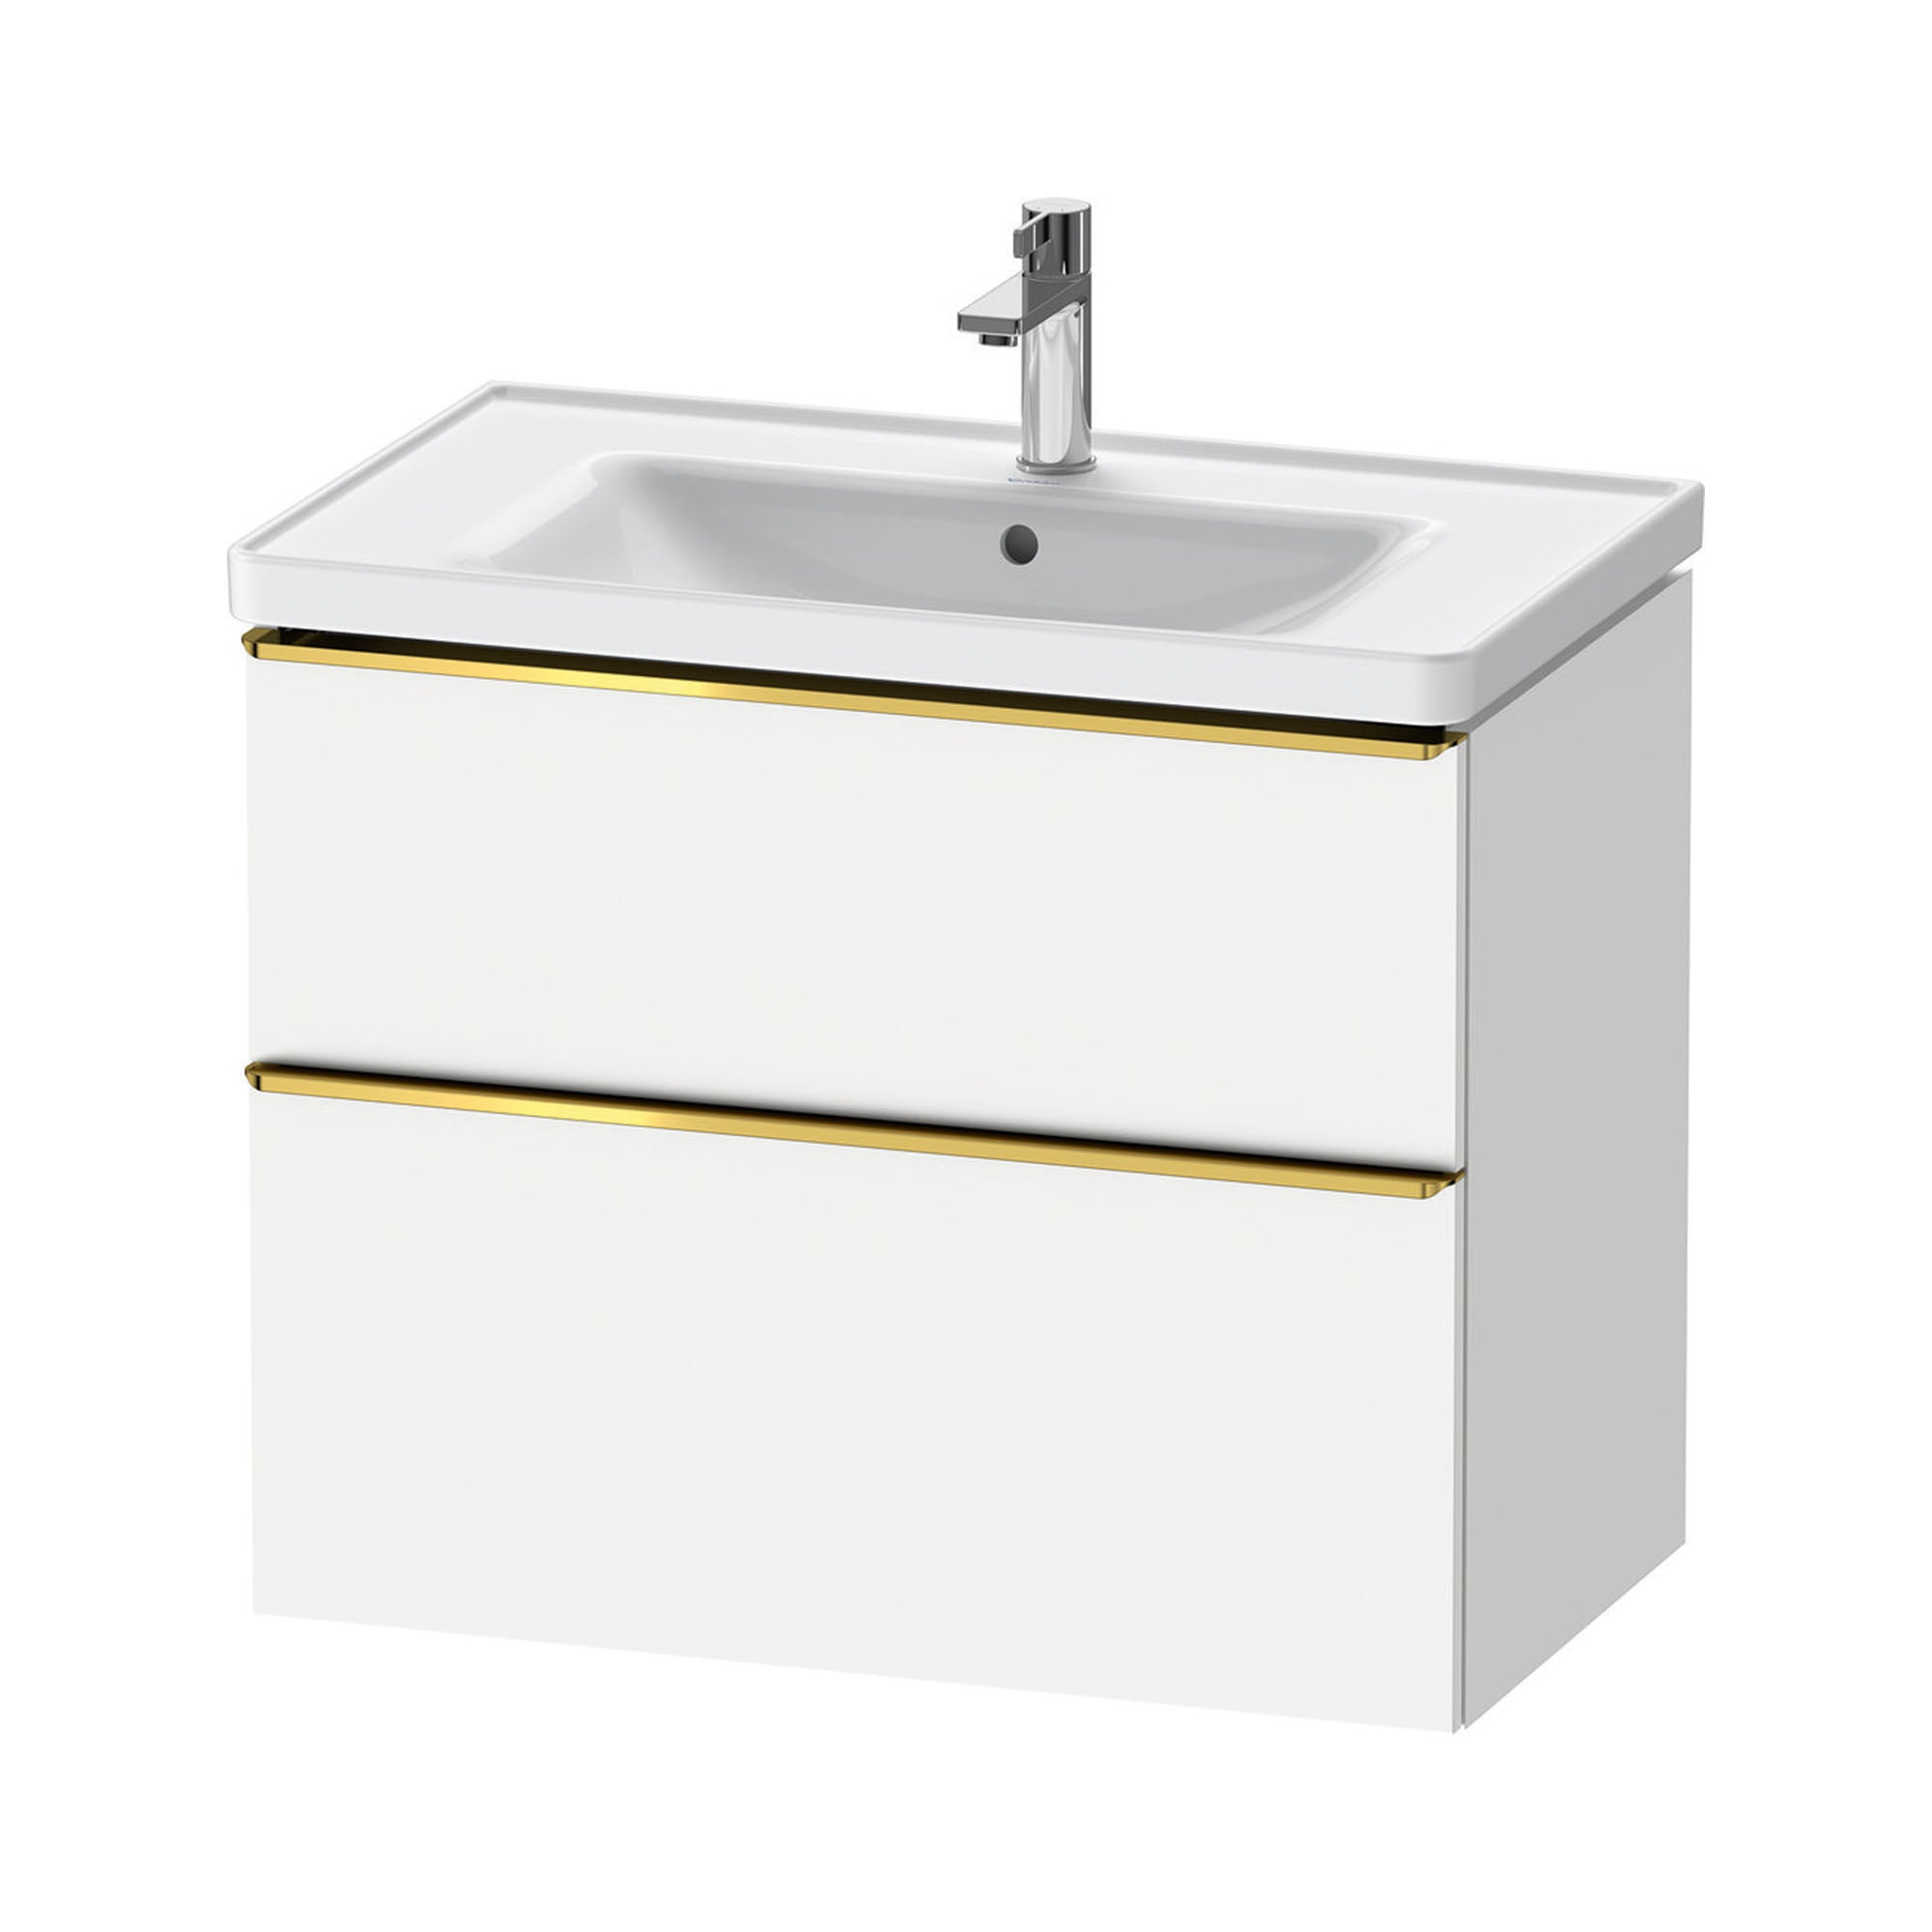 duravit d-neo 800mm wall mounted vanity unit with d-neo basin matt white gold handles